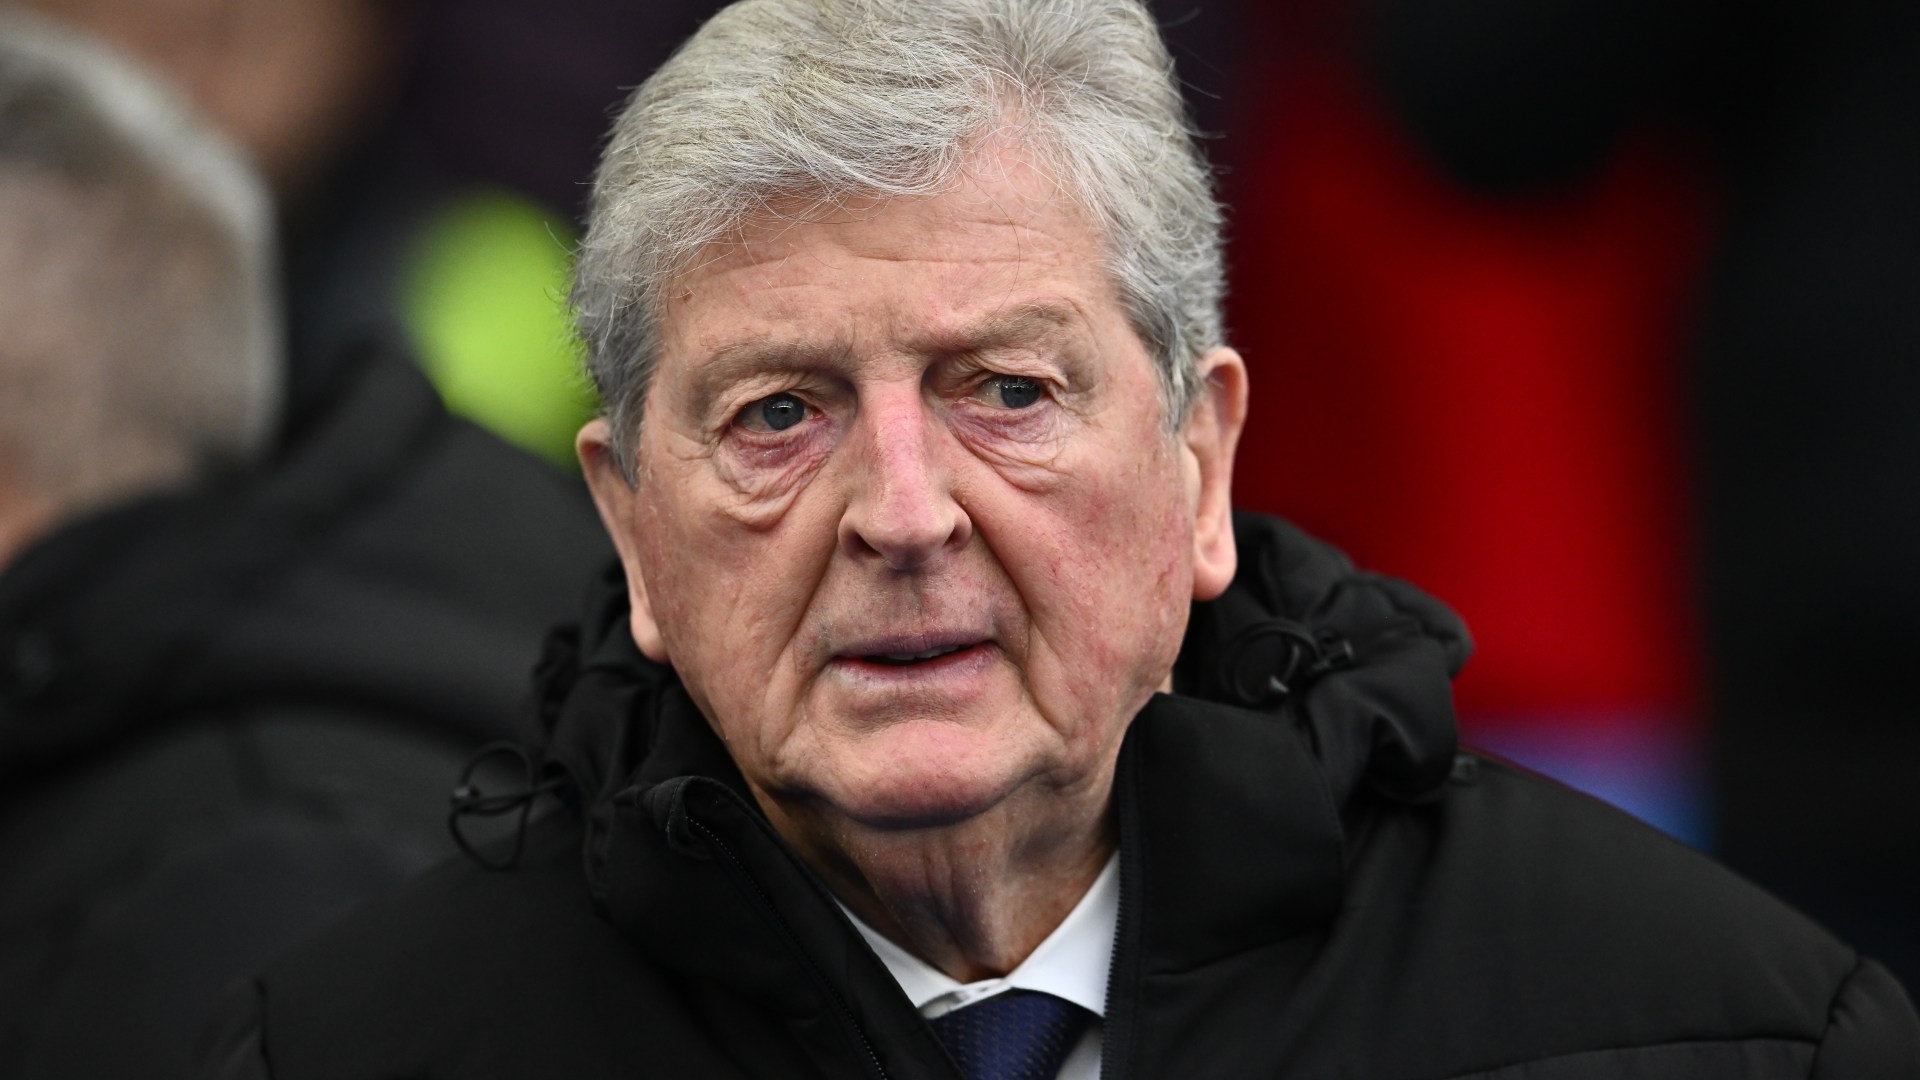 Roy Hodgson ‘stable’ after being taken ill amid sacking reports as Crystal Palace cancel press conference [Video]